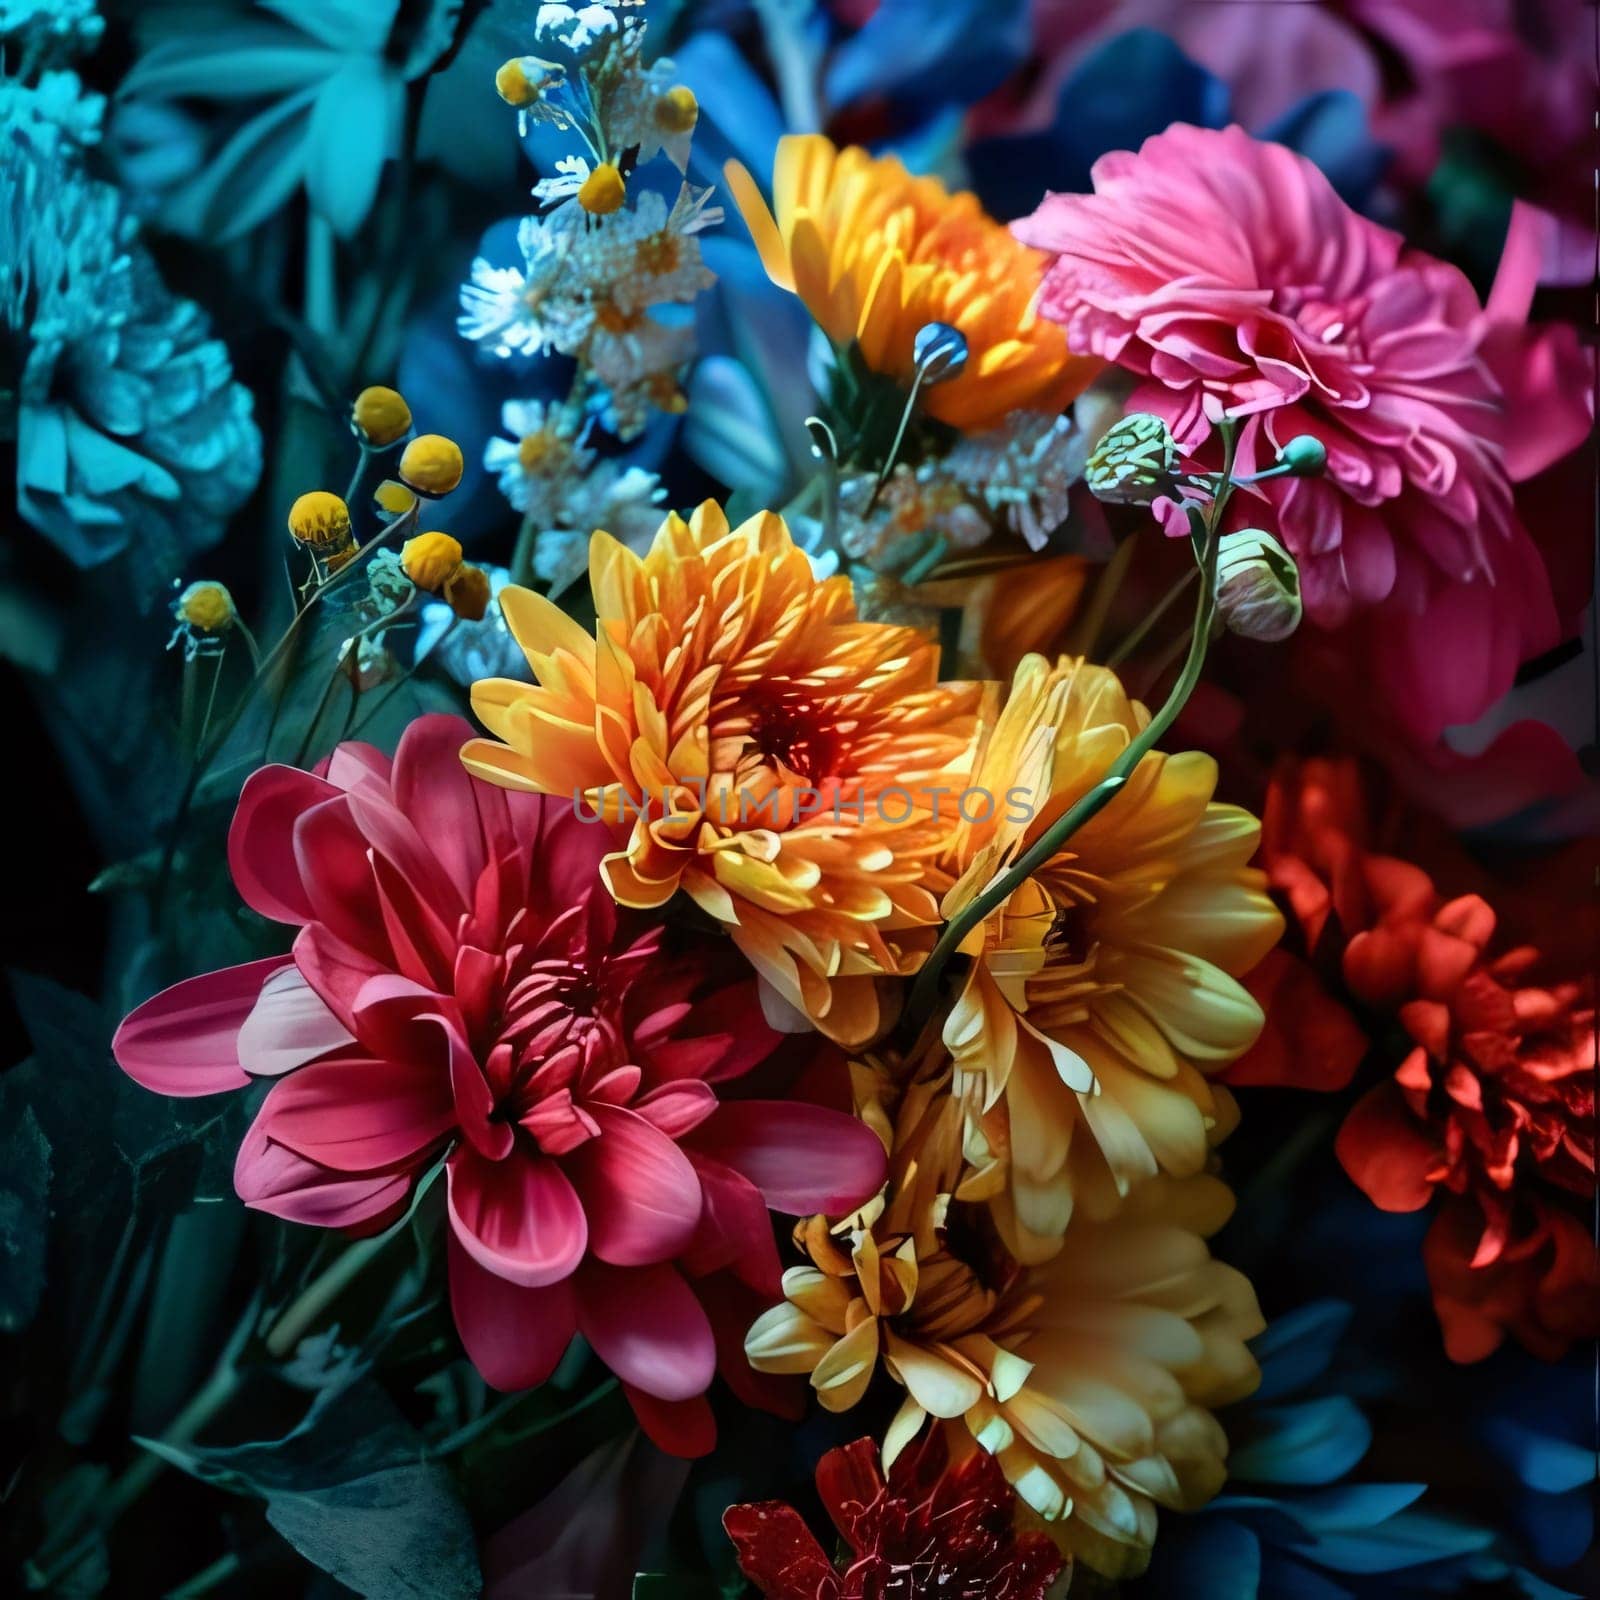 Colorful flowers, petals. Flowering flowers, a symbol of spring, new life. by ThemesS